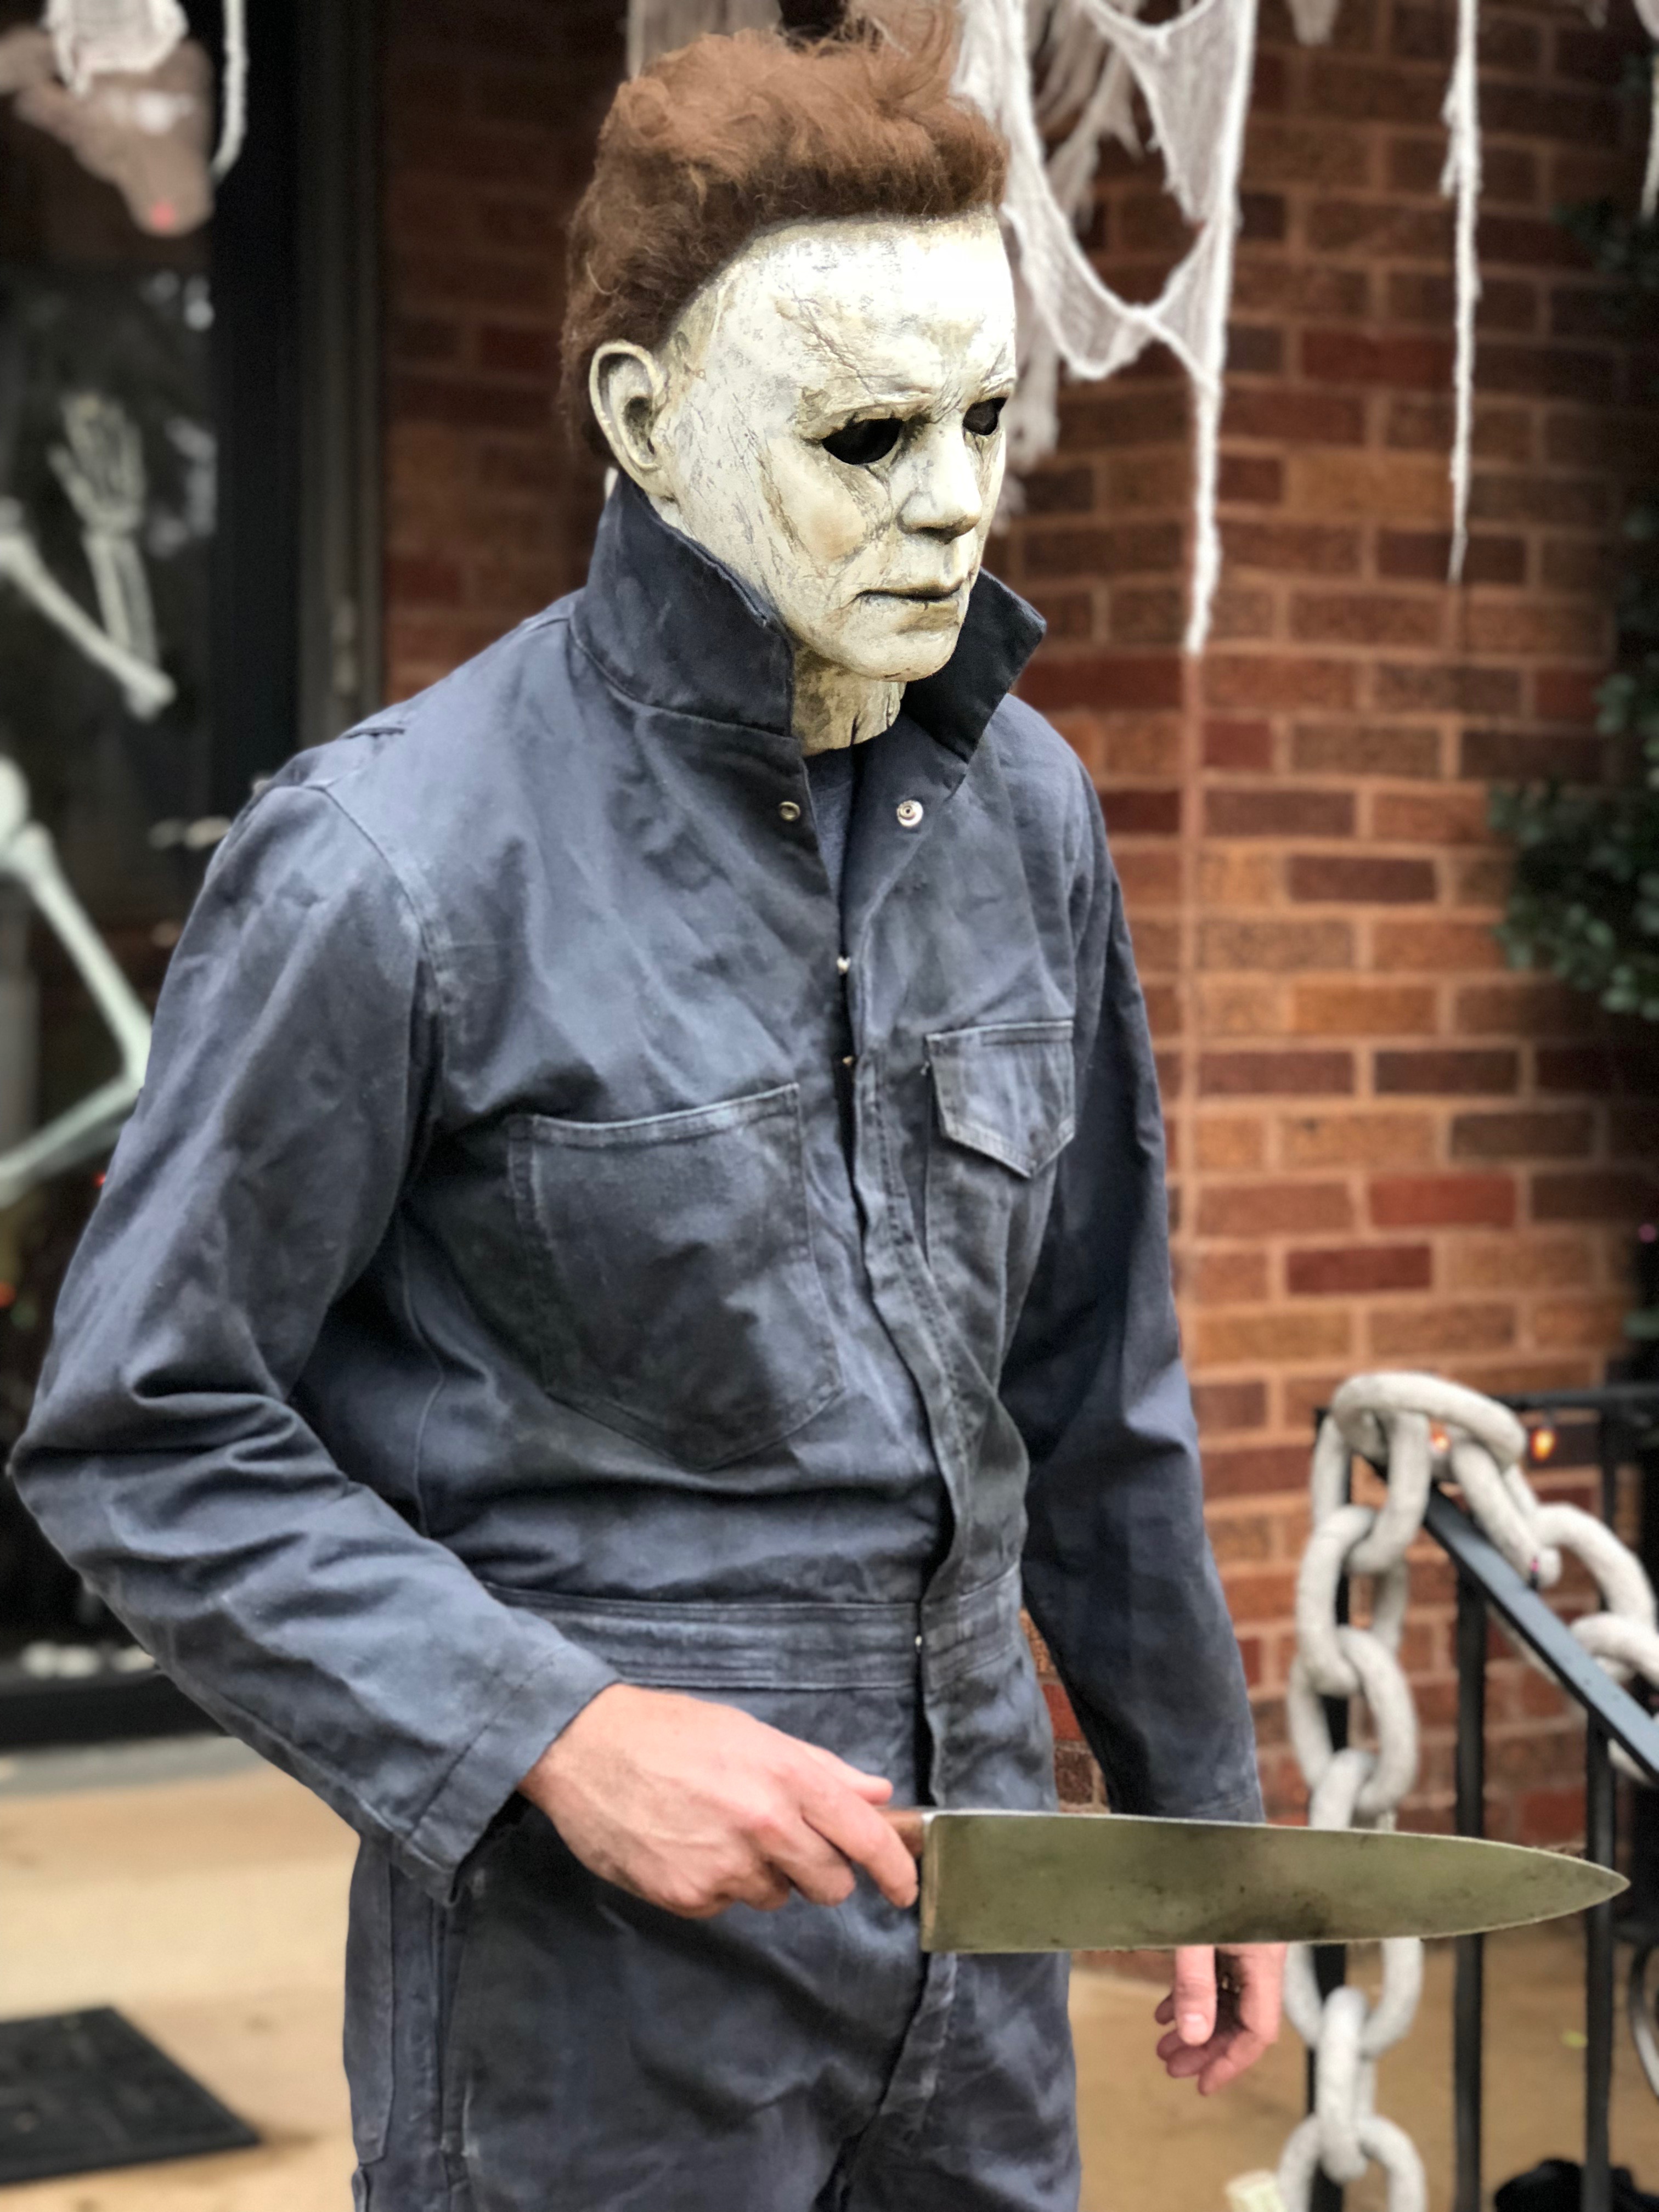 Halloween (2018) Michael Myers Costume Research Thread | Page 5 | RPF  Costume and Prop Maker Community